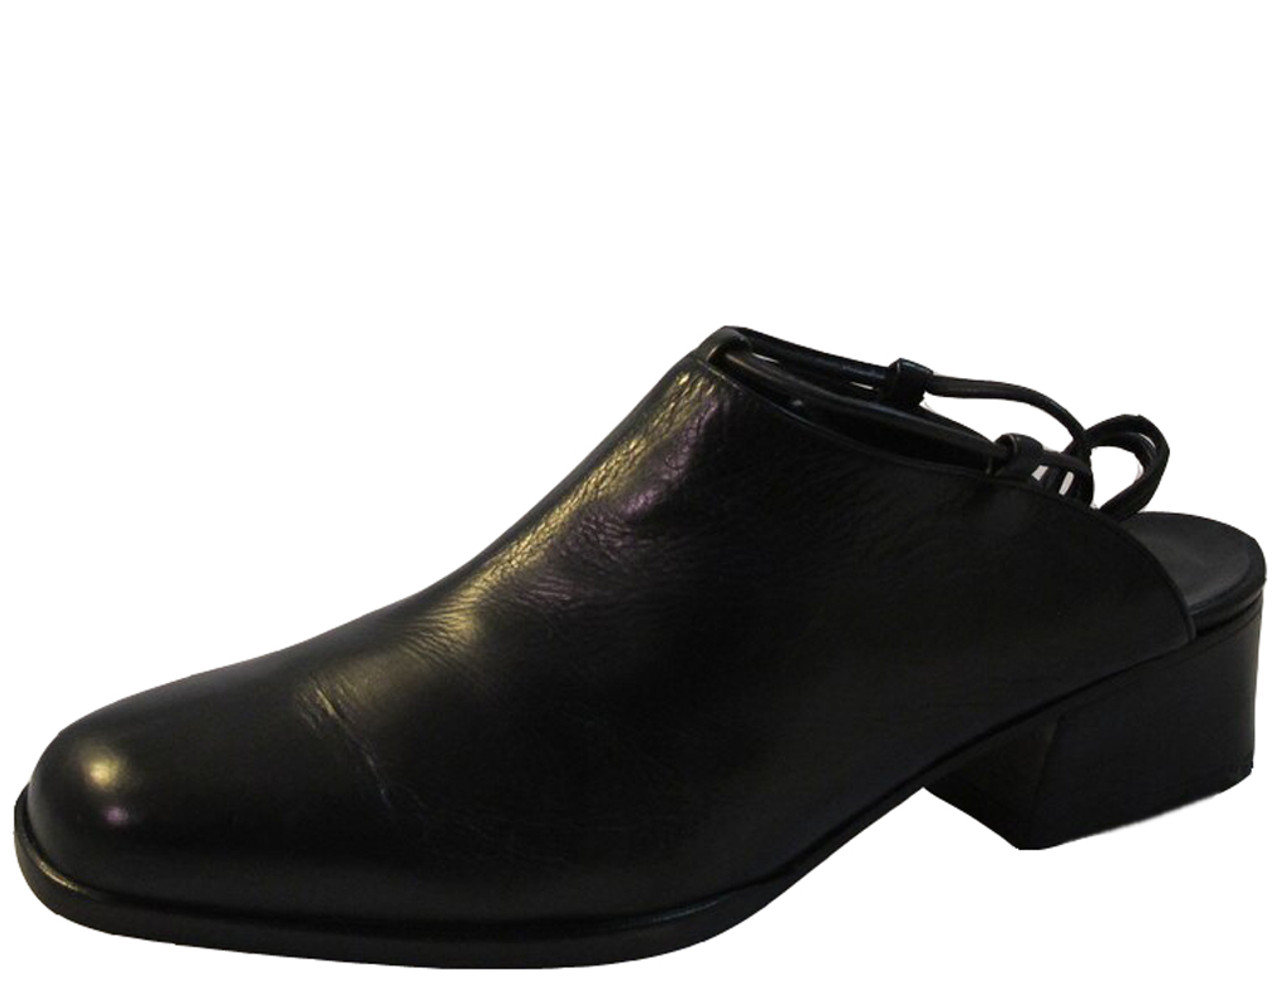 Silhouette Mules - Shoes 1AAZUG